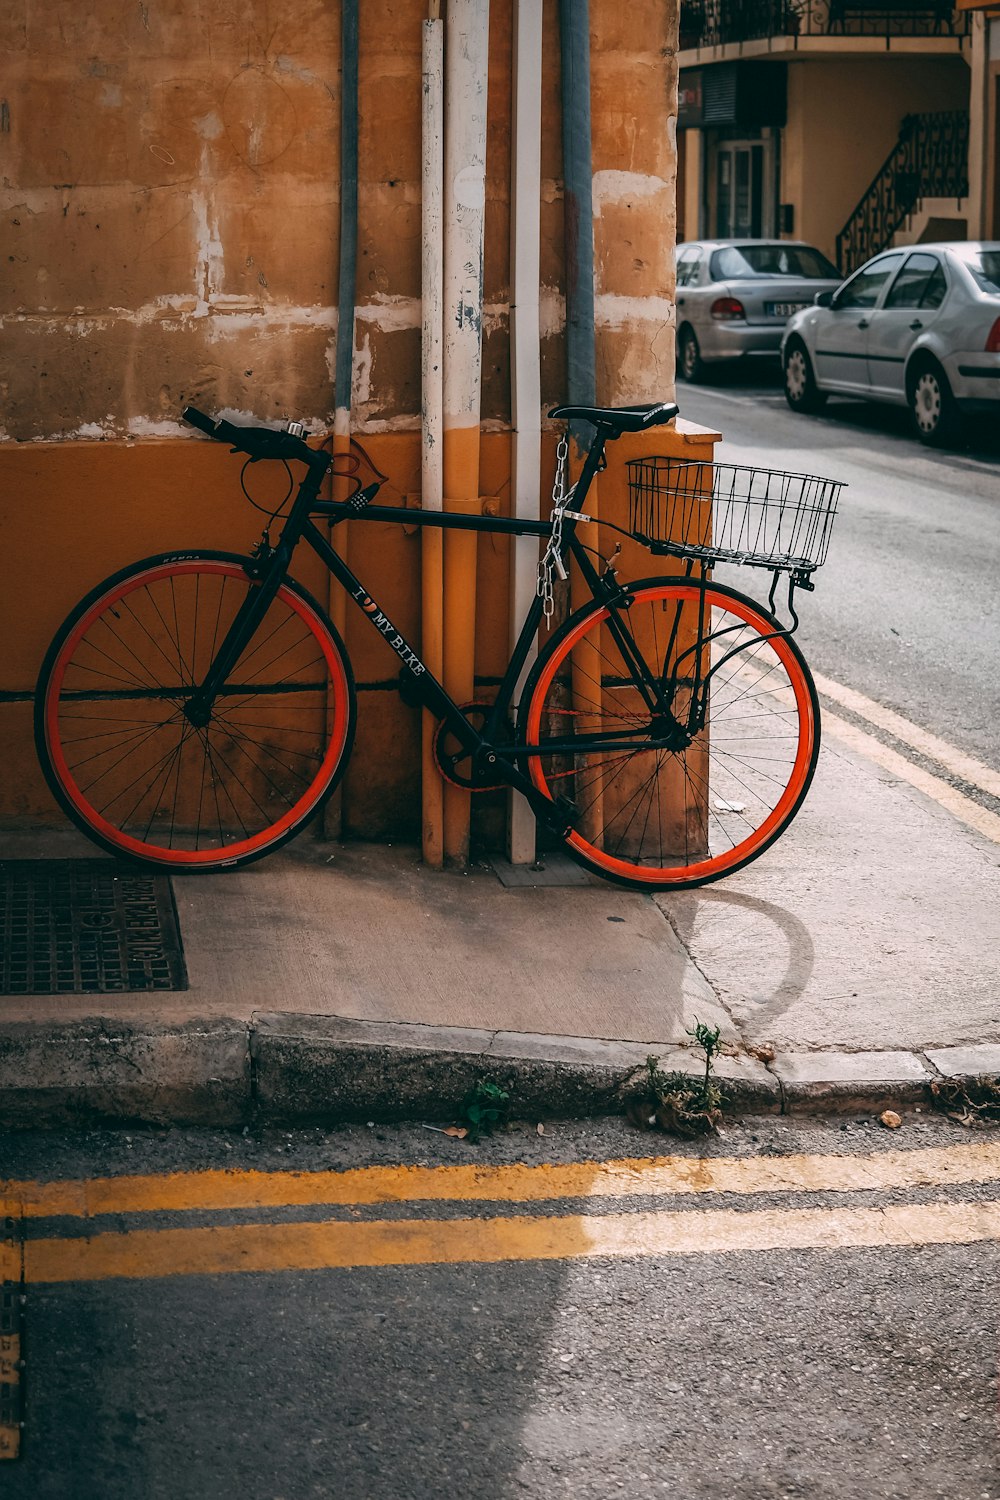 a bicycle parked next to a building on a city street